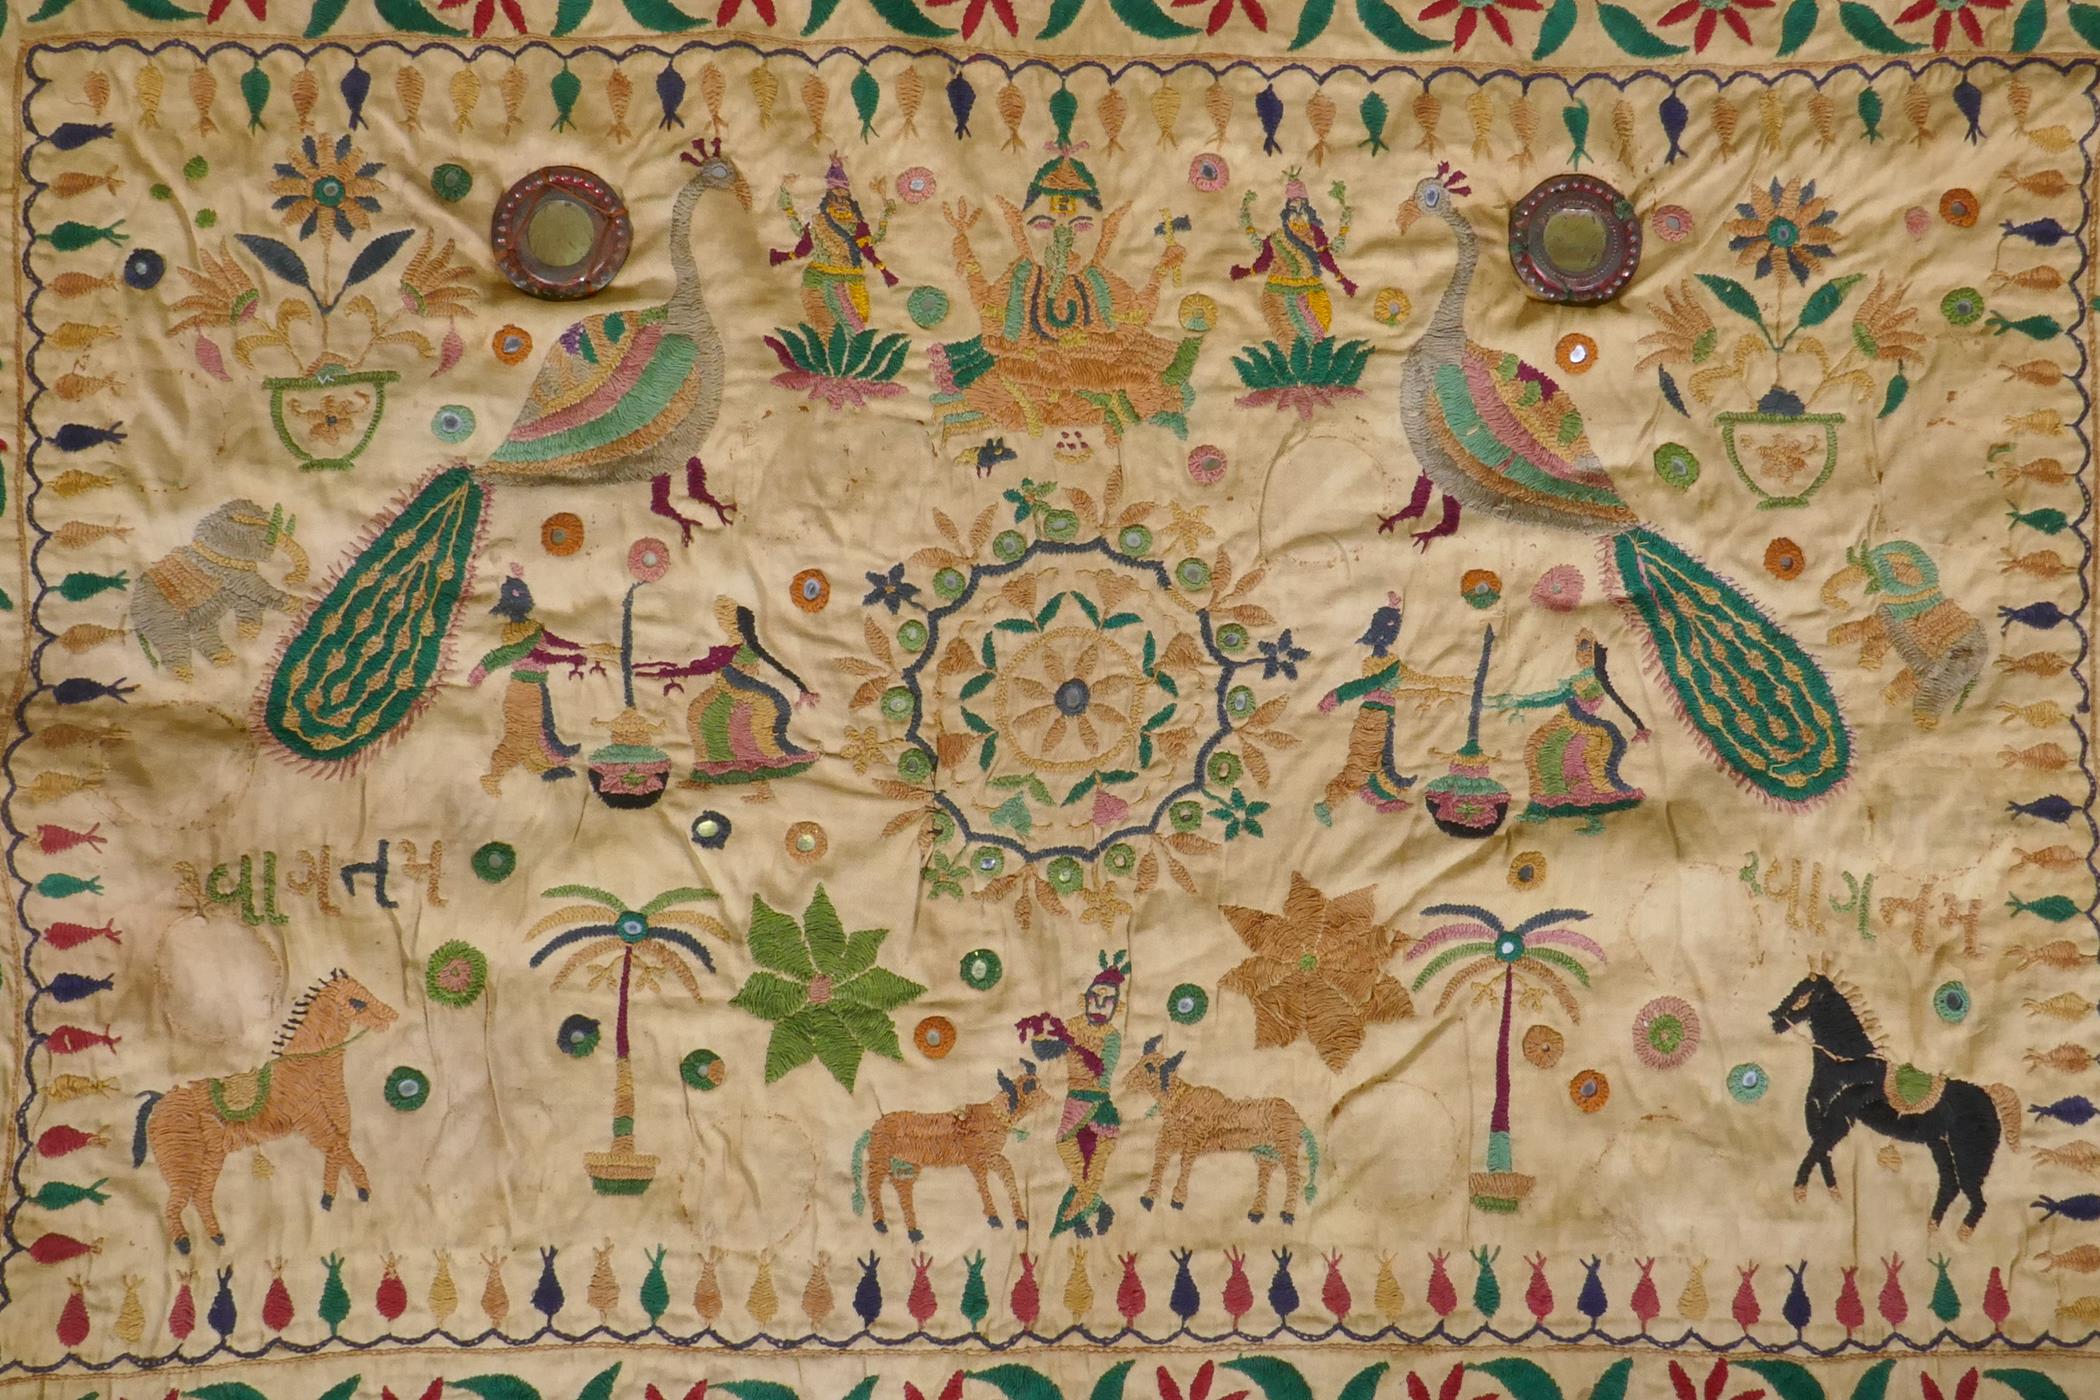 A C19th Indian embroidered wall hanging decorated with depictions of Ganesh, peacocks, elephants, - Image 2 of 9